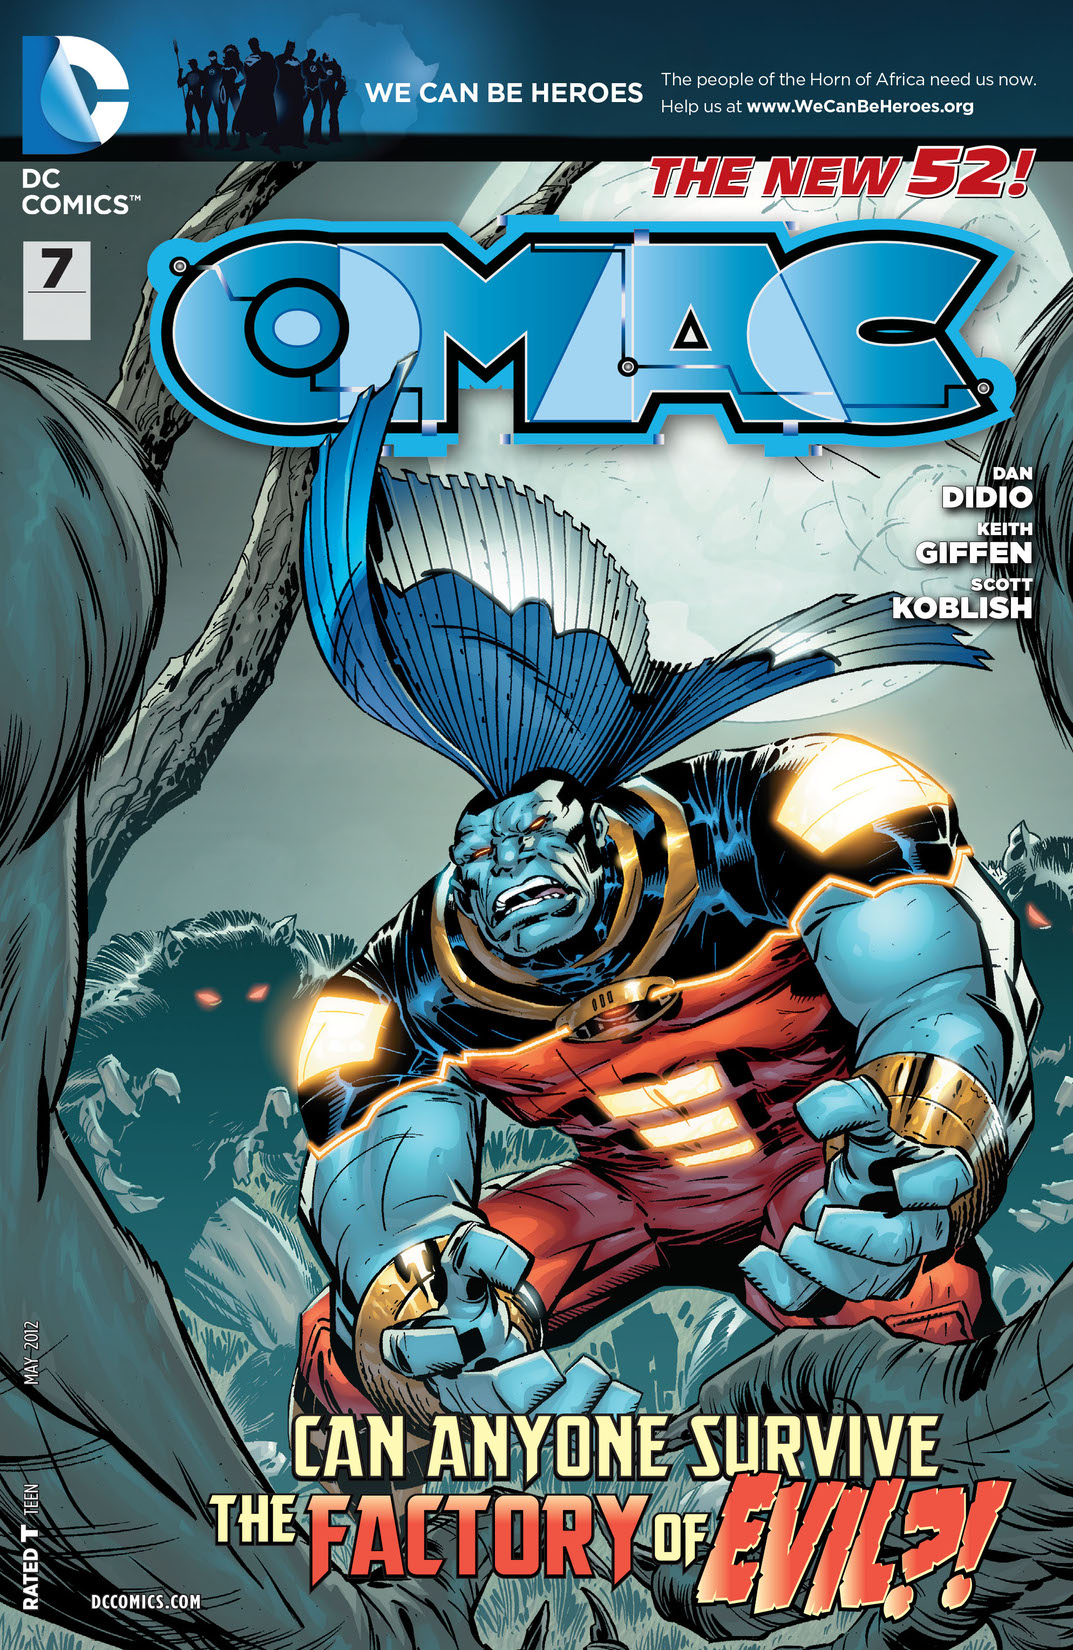 OMAC (2011-) #7 preview images